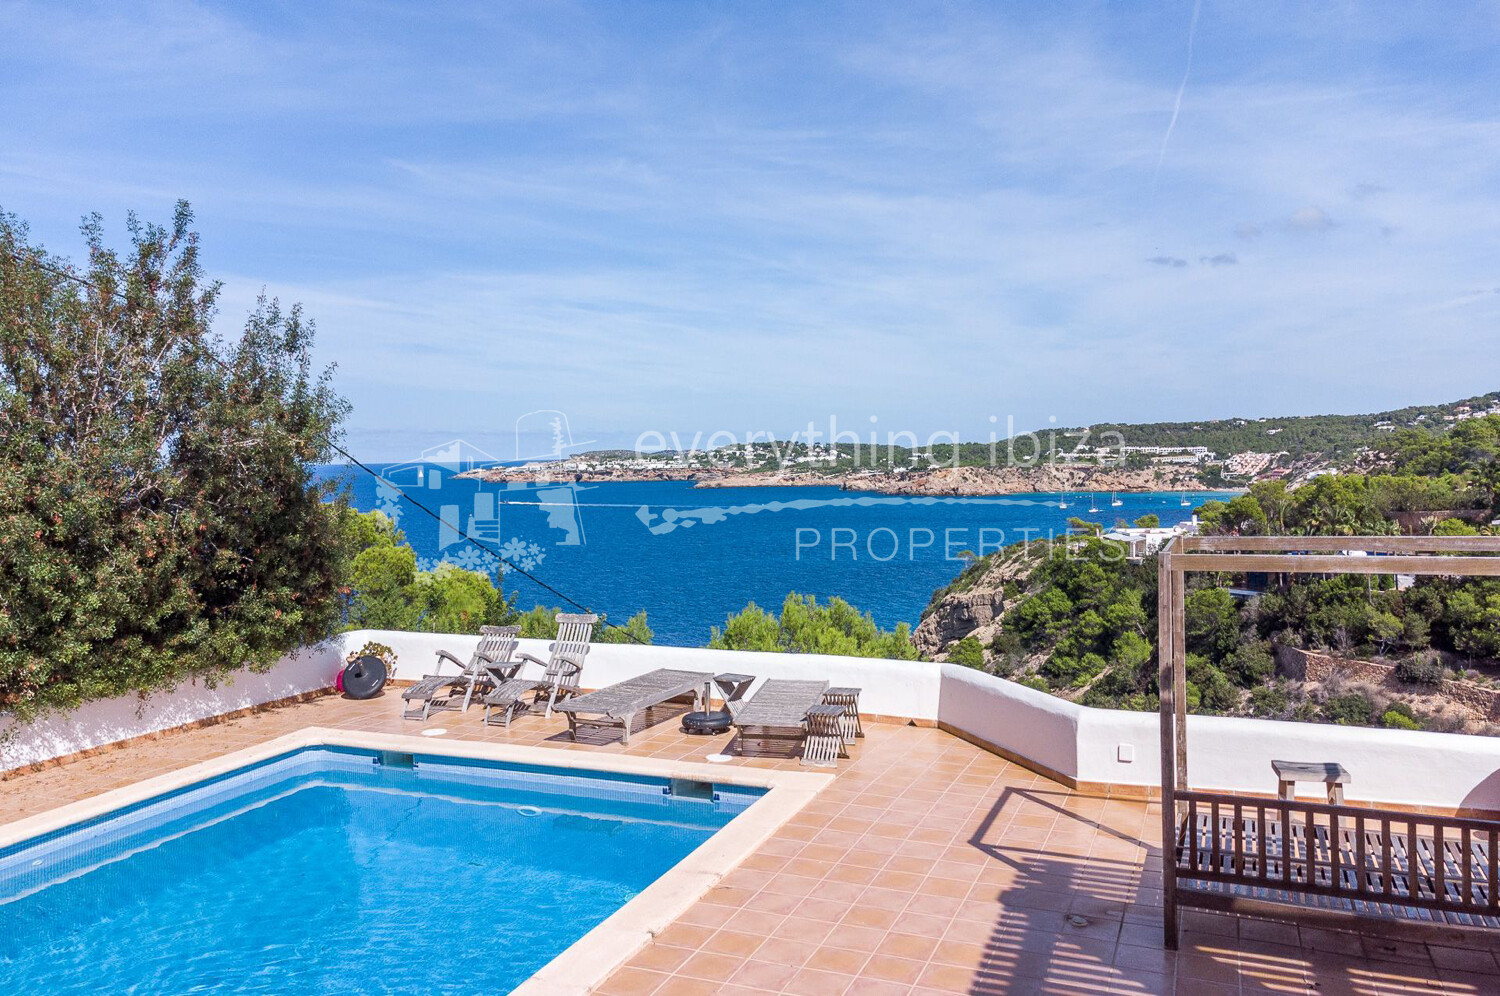 Charming Elegant Villa with Super Sea & Coastline Views in Peaceful Cala Moli, ref. 1704, for sale in Ibiza by everything ibiza Properties